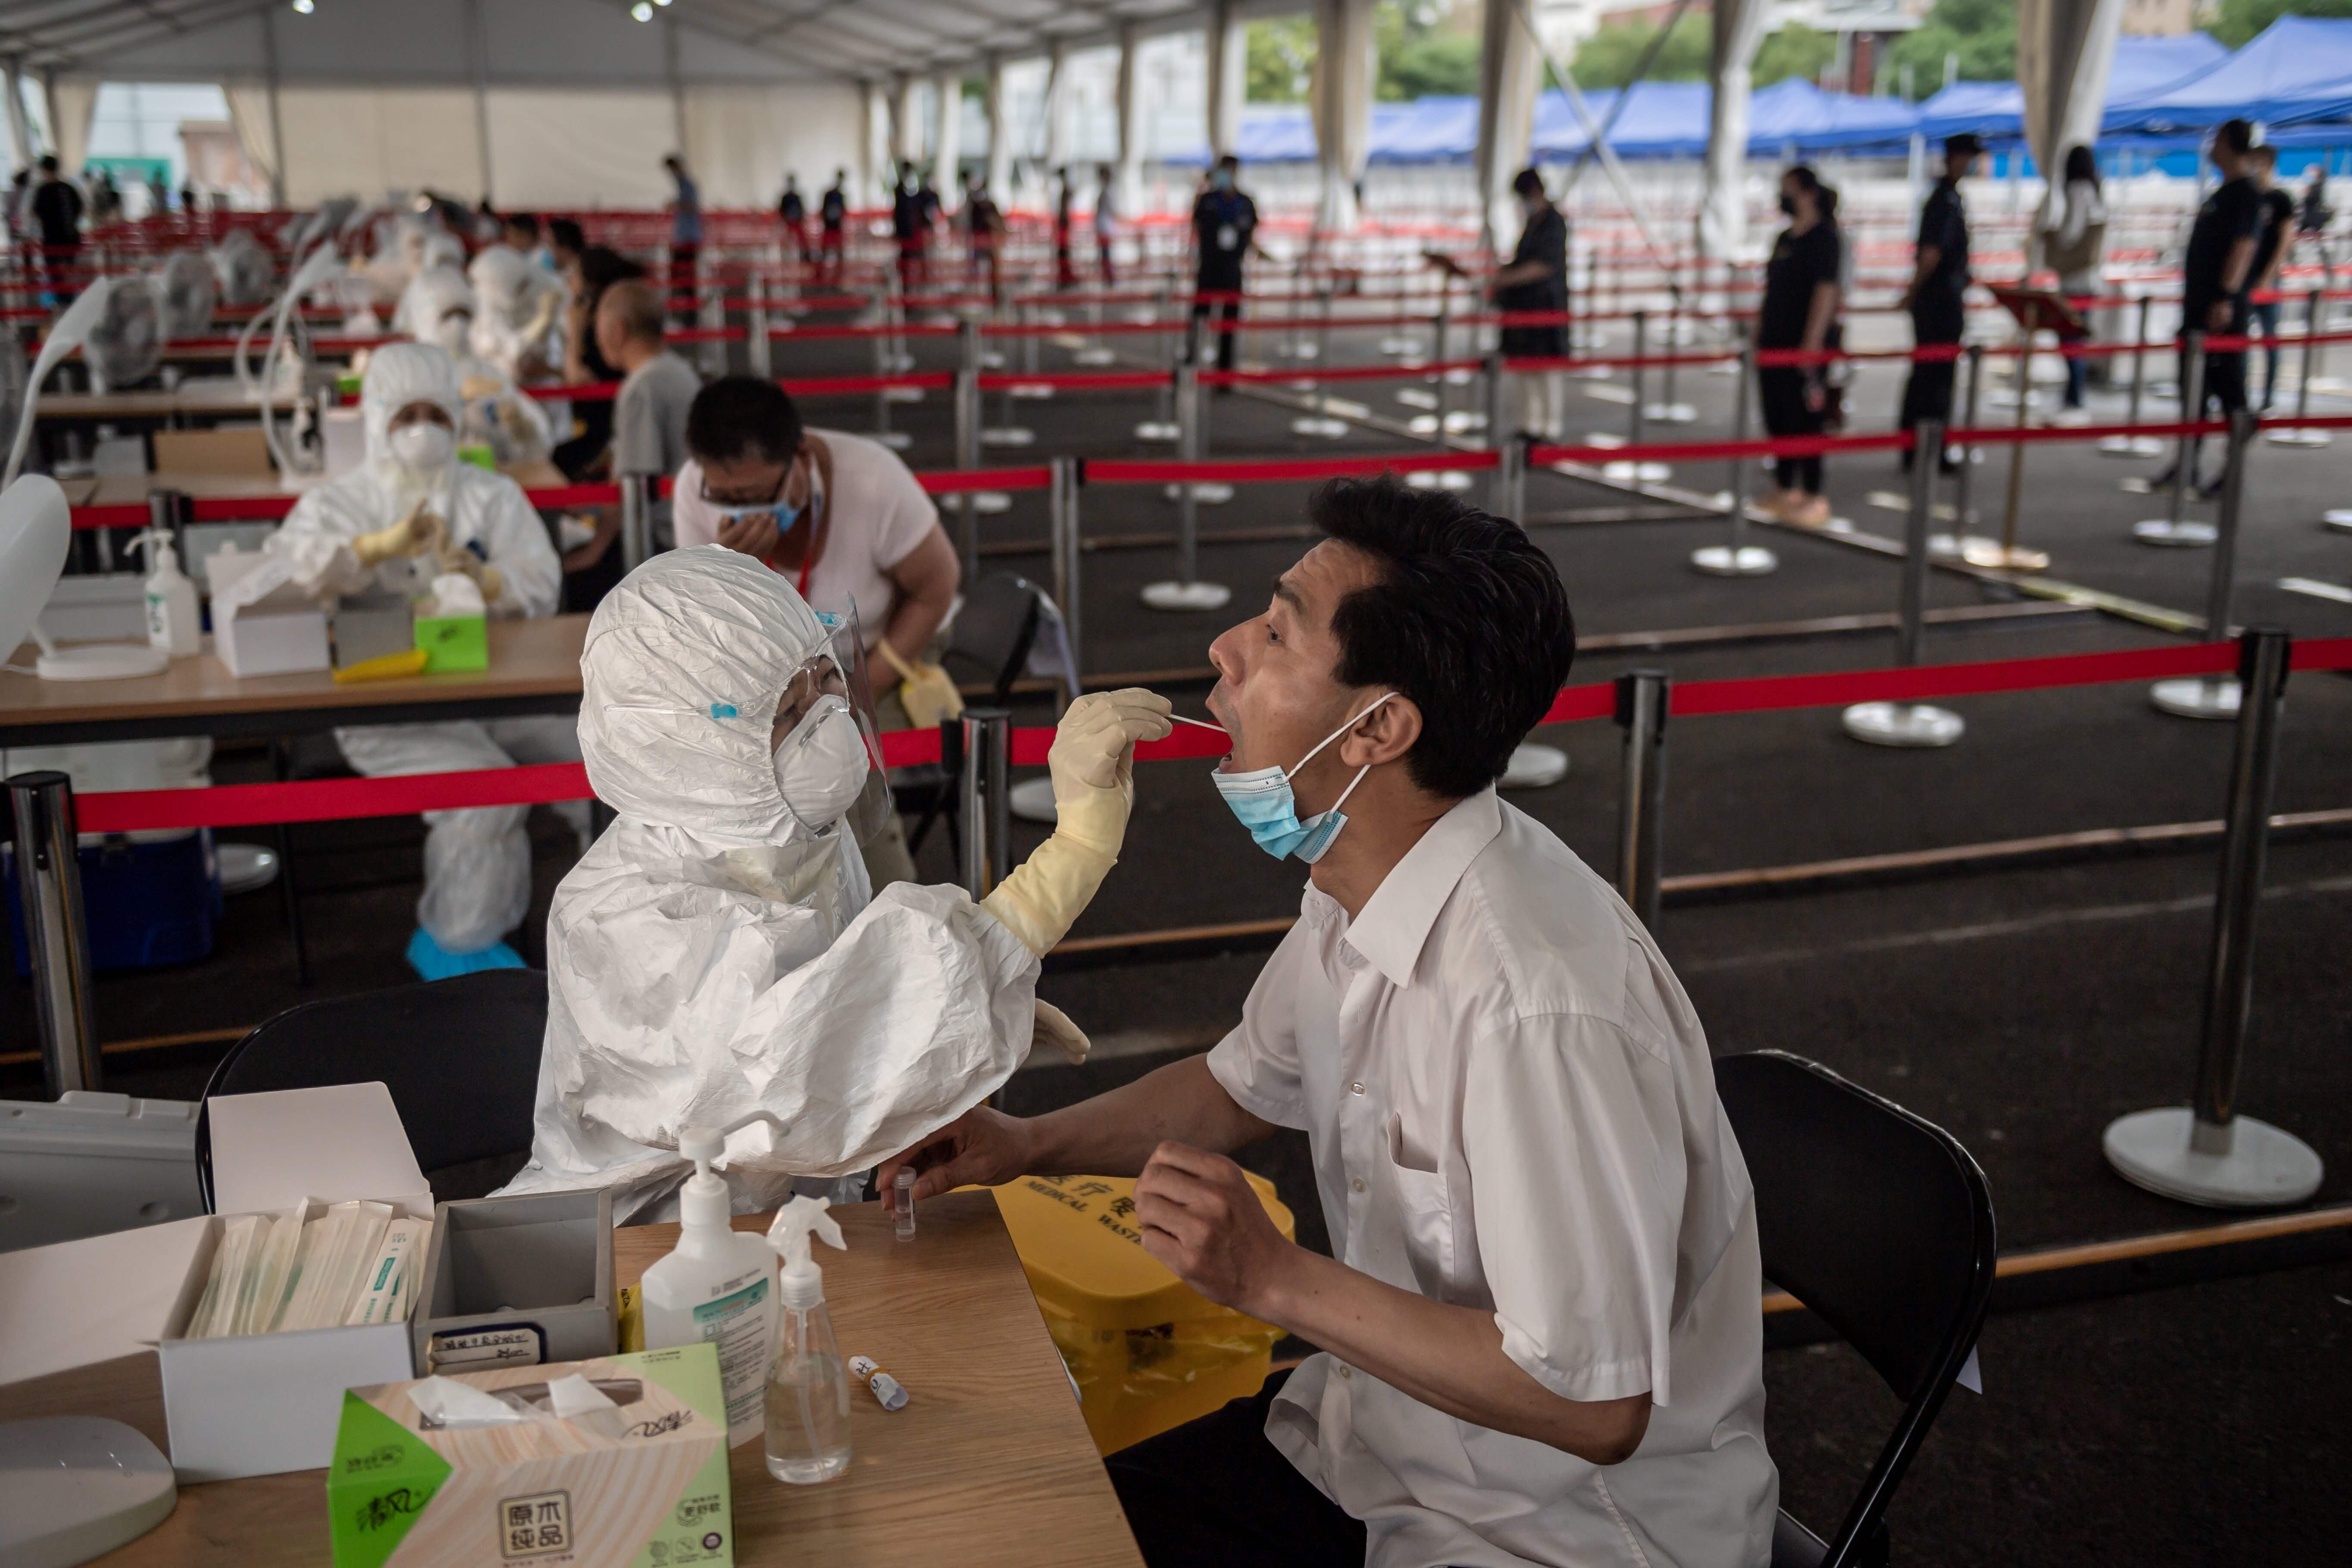 A health worker takes a swab test on a man during mass testing for Covid-19 at the Jinrong Street testing site in Beijing on June 24. Hong Kong could boost its testing capacity by tapping into excess capacity on the mainland. Photo: AFP